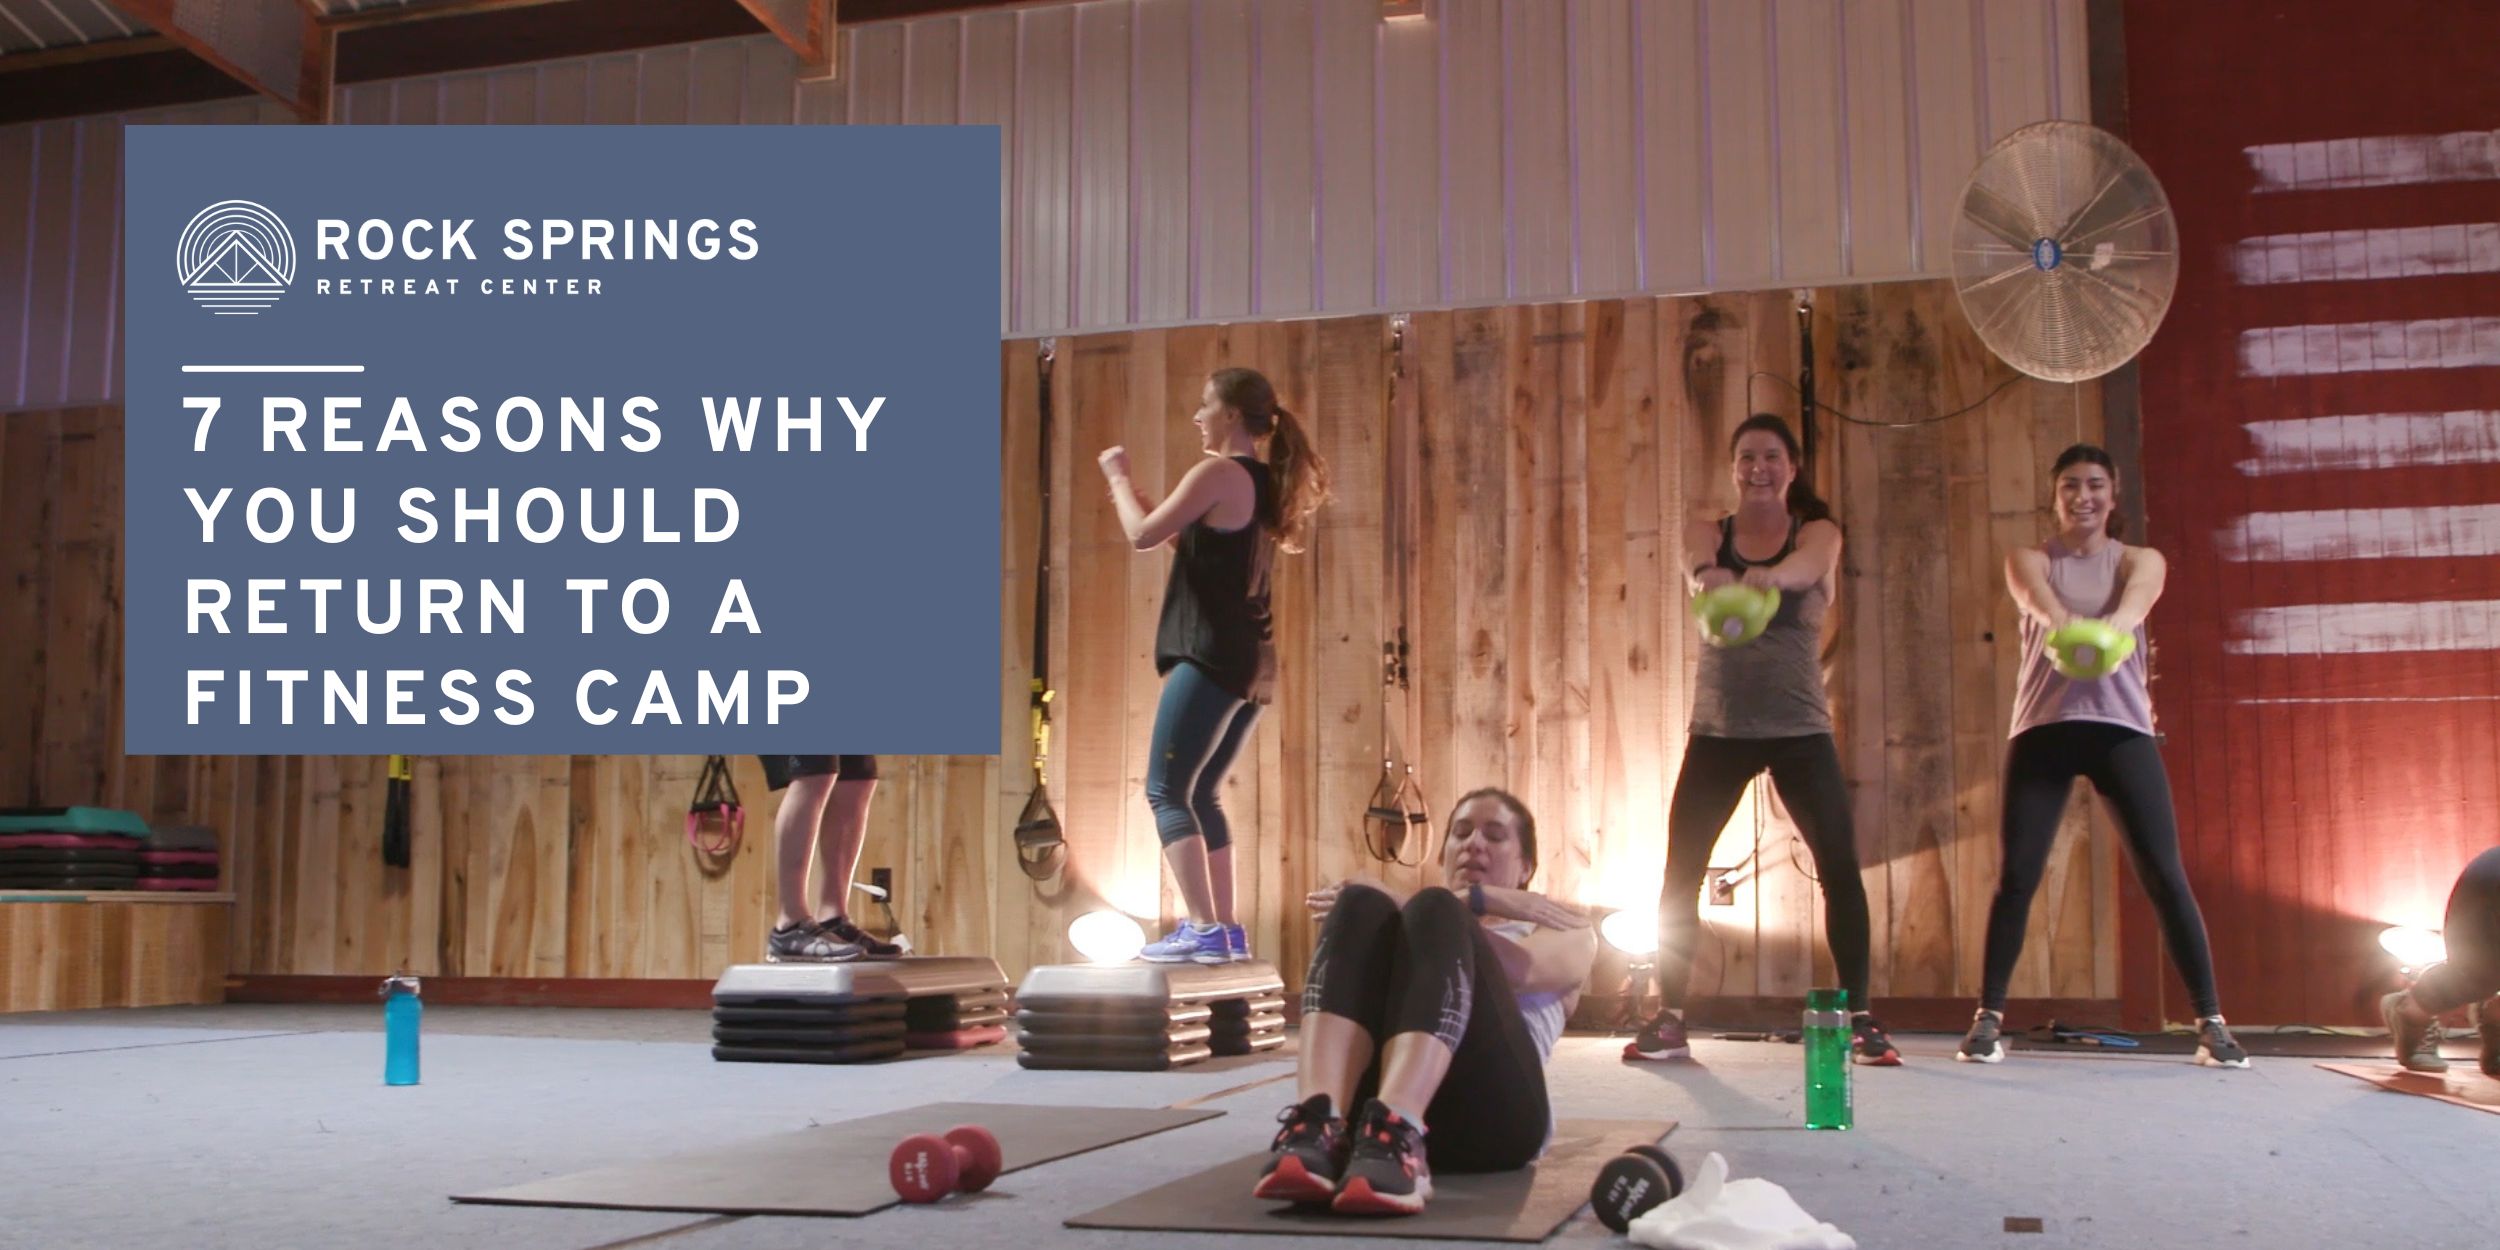 7 Reasons Why You Should Return to a Fitness Camp